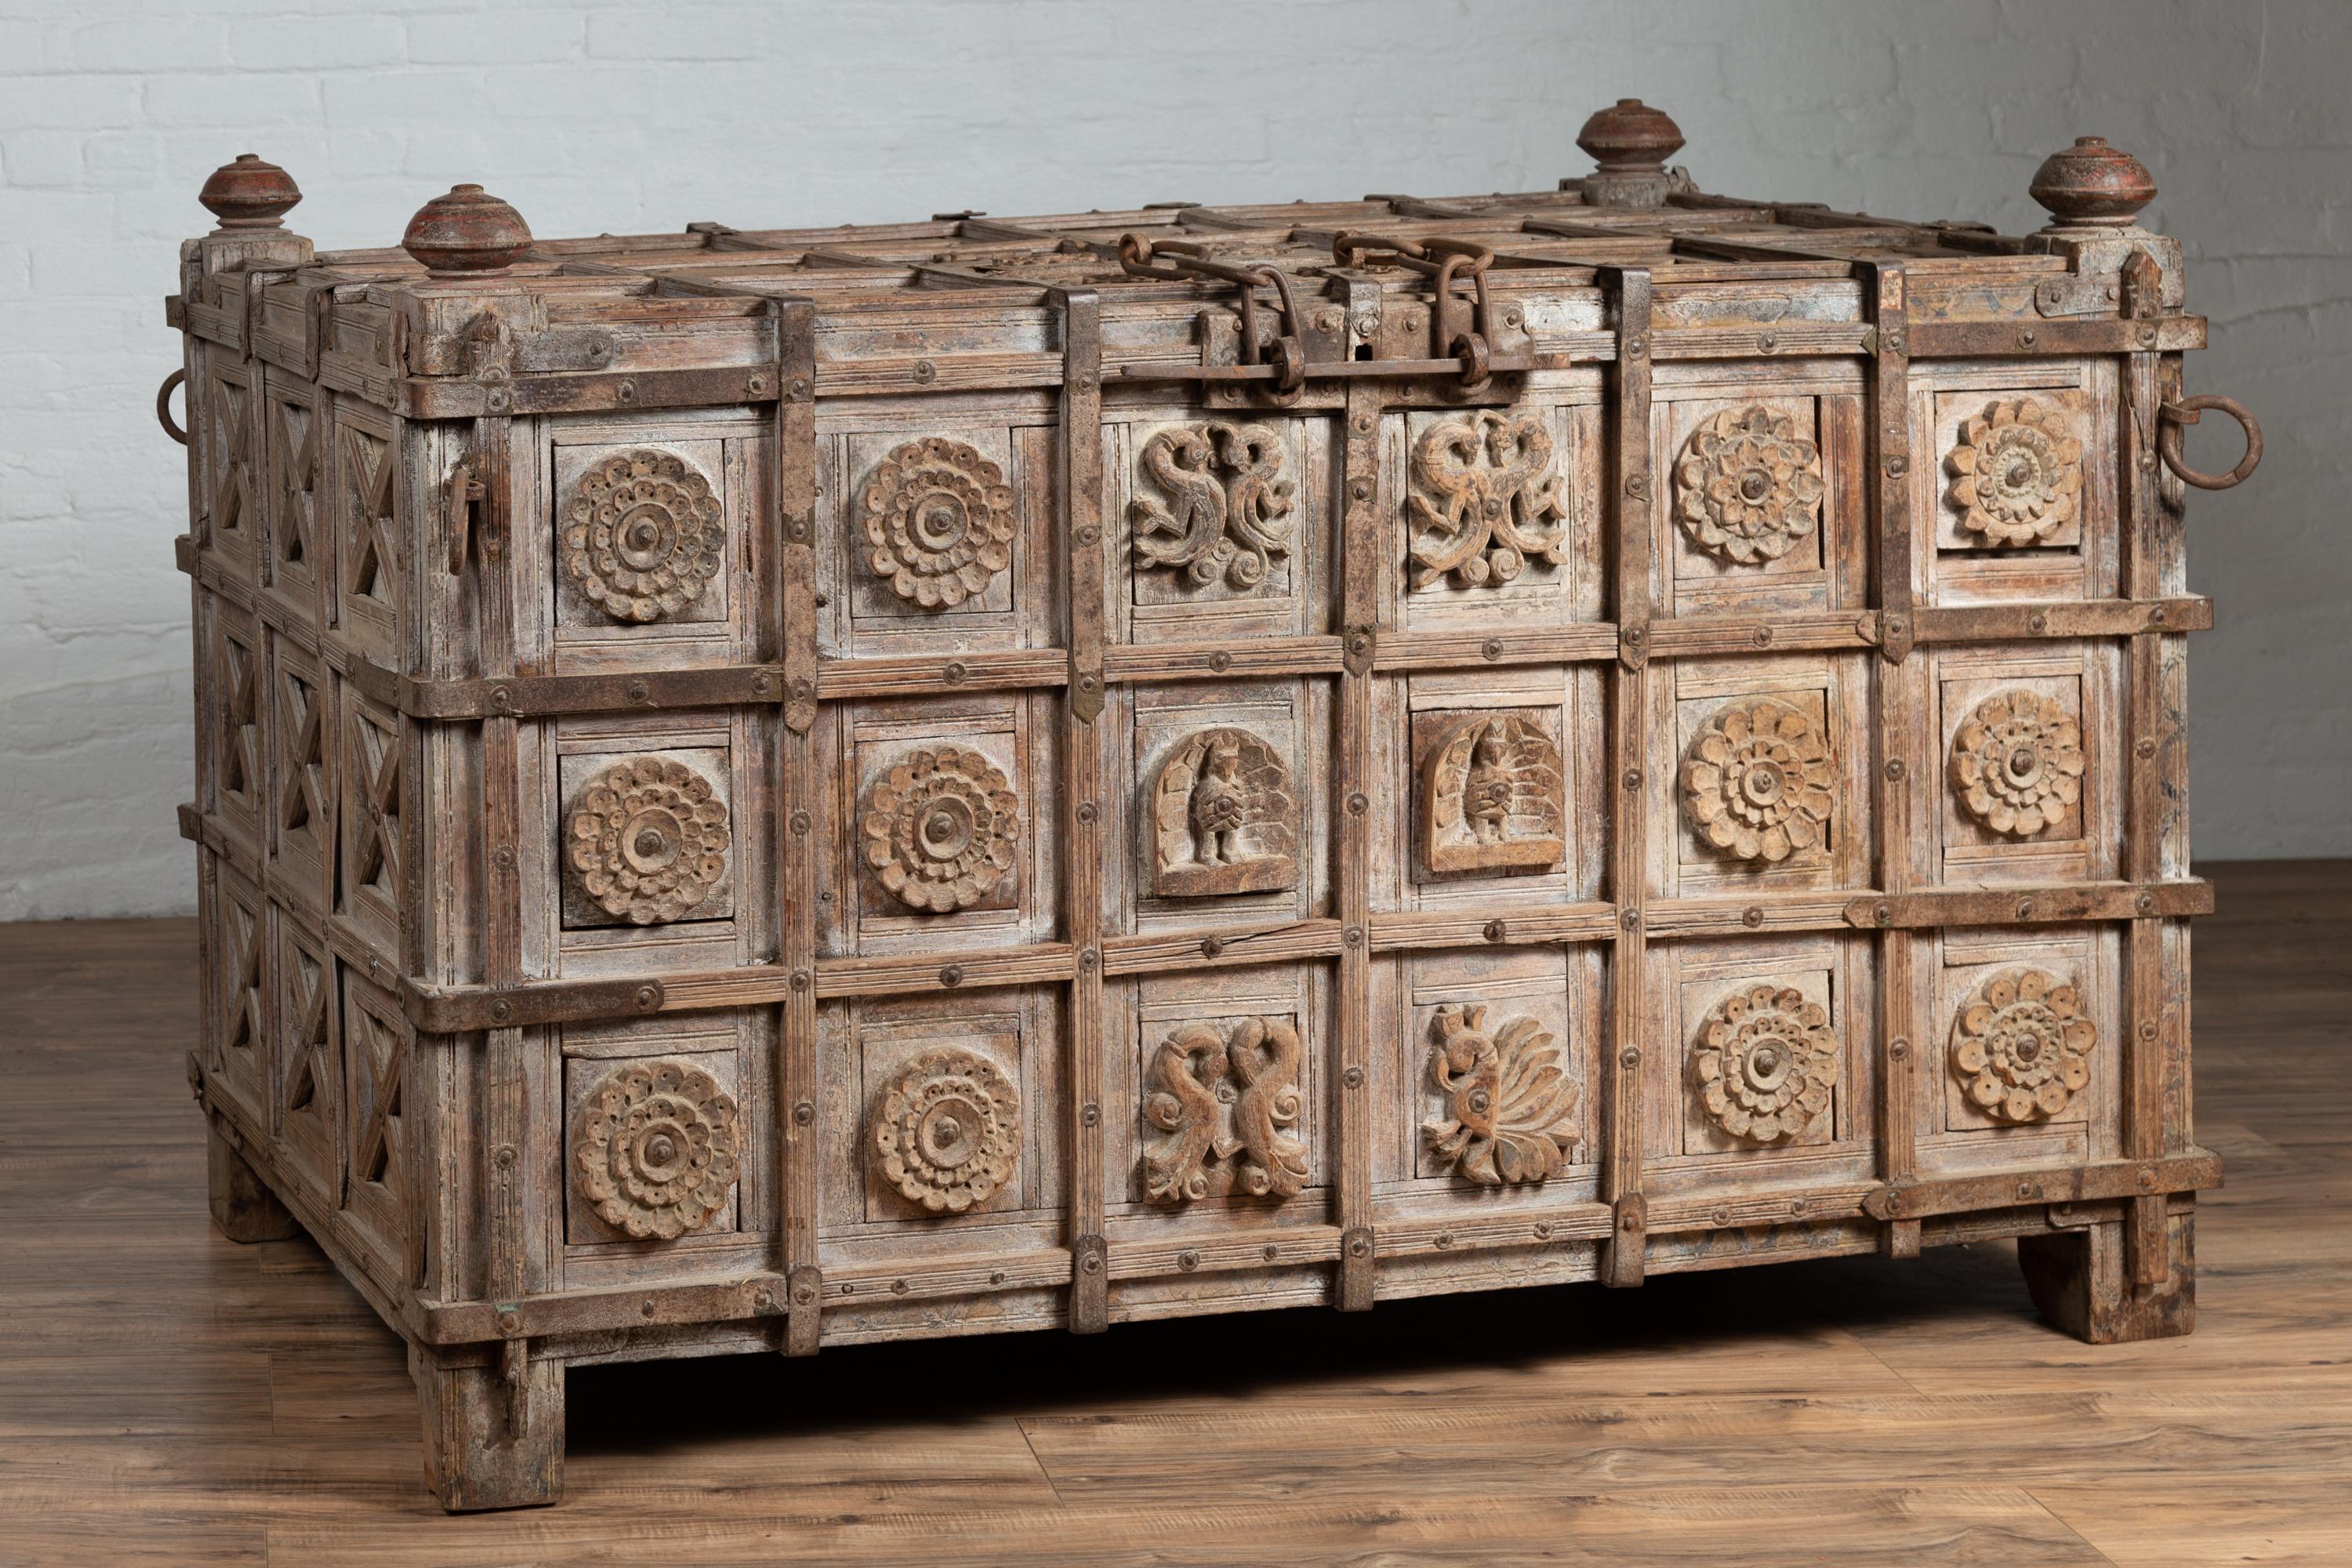 Carved Oversized Indian Treasure Chest with Raised X Patterns, Rosettes and Animals